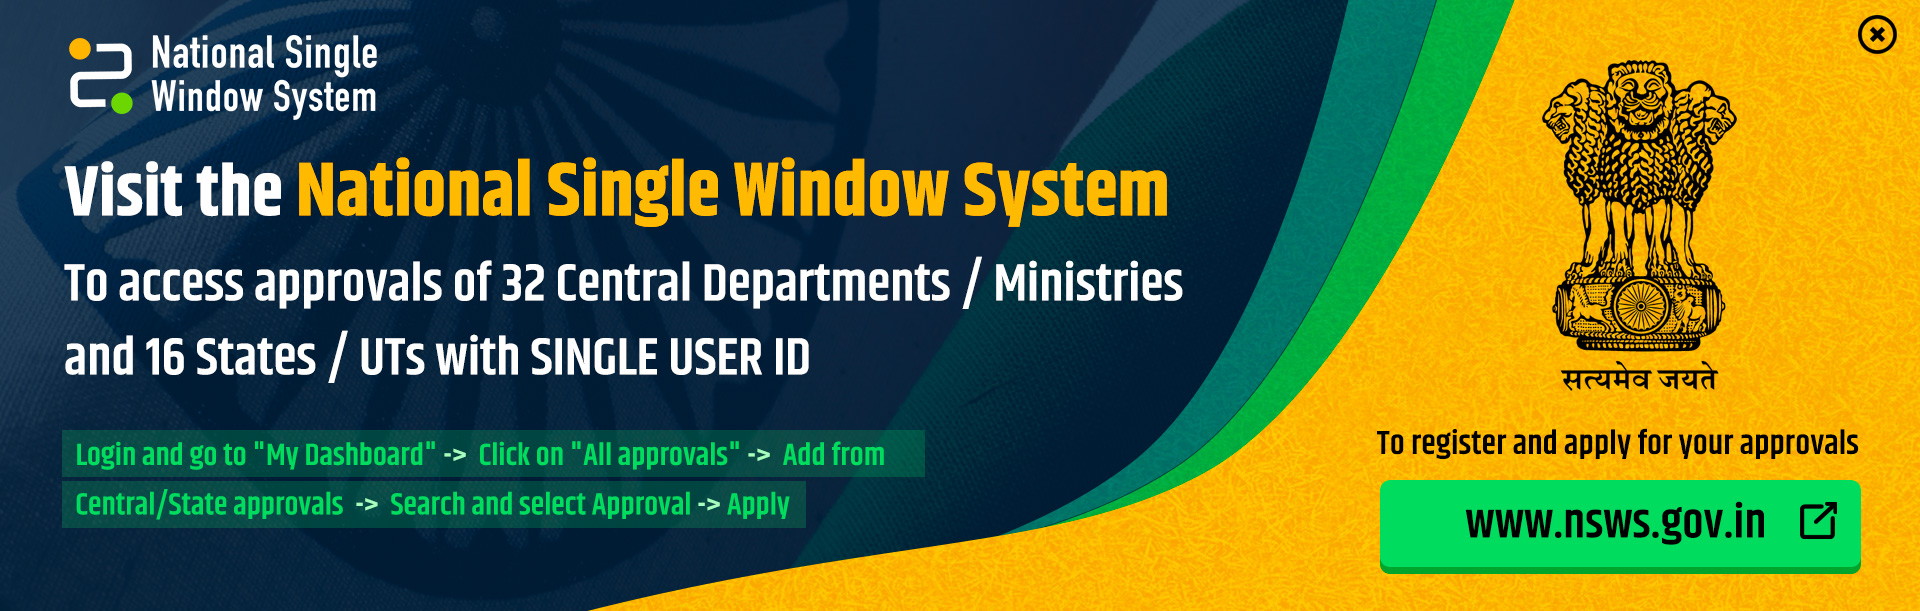 The National Single Window System has access to over 100 Central level approvals and State Single Window Systems of 14 States/ UTs with one user id and password